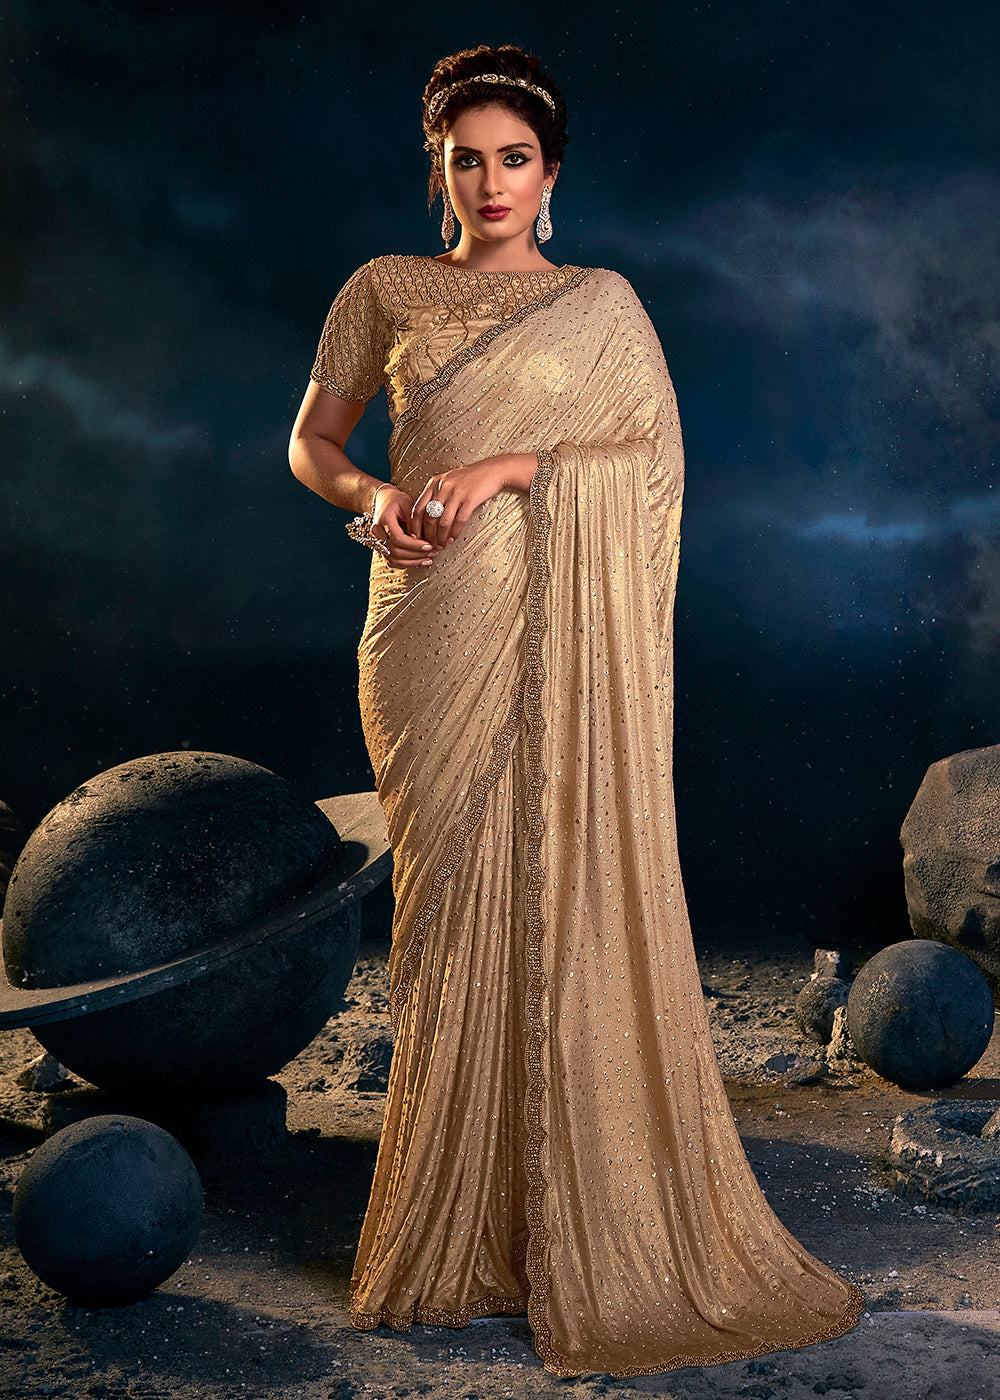 Beige Color Shimmer Silk Embroidery Designer Party Wear Saree